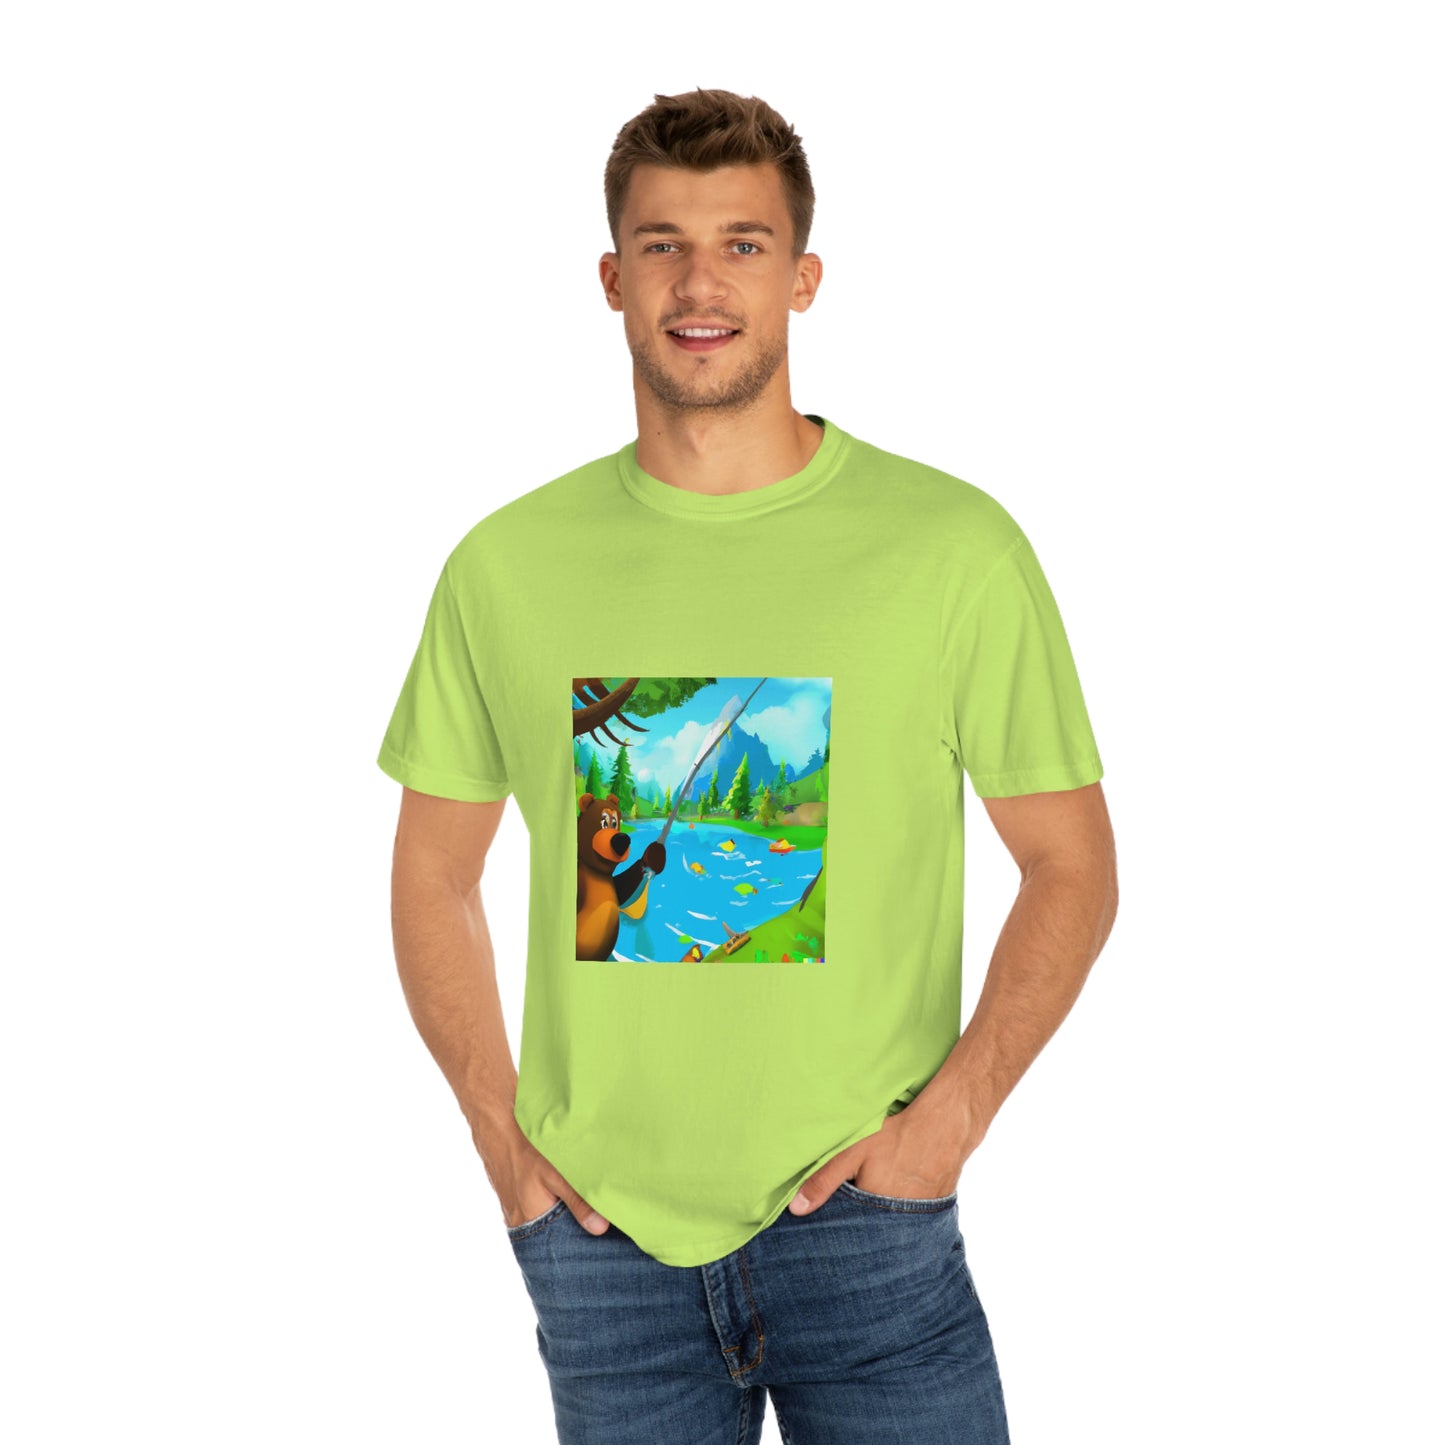 A Comfortable Tee  Get in Touch with Nature and Show Your Love for Fishing with Konaloo's Bear Fishing at Lake Garment-Dyed T-Shirt